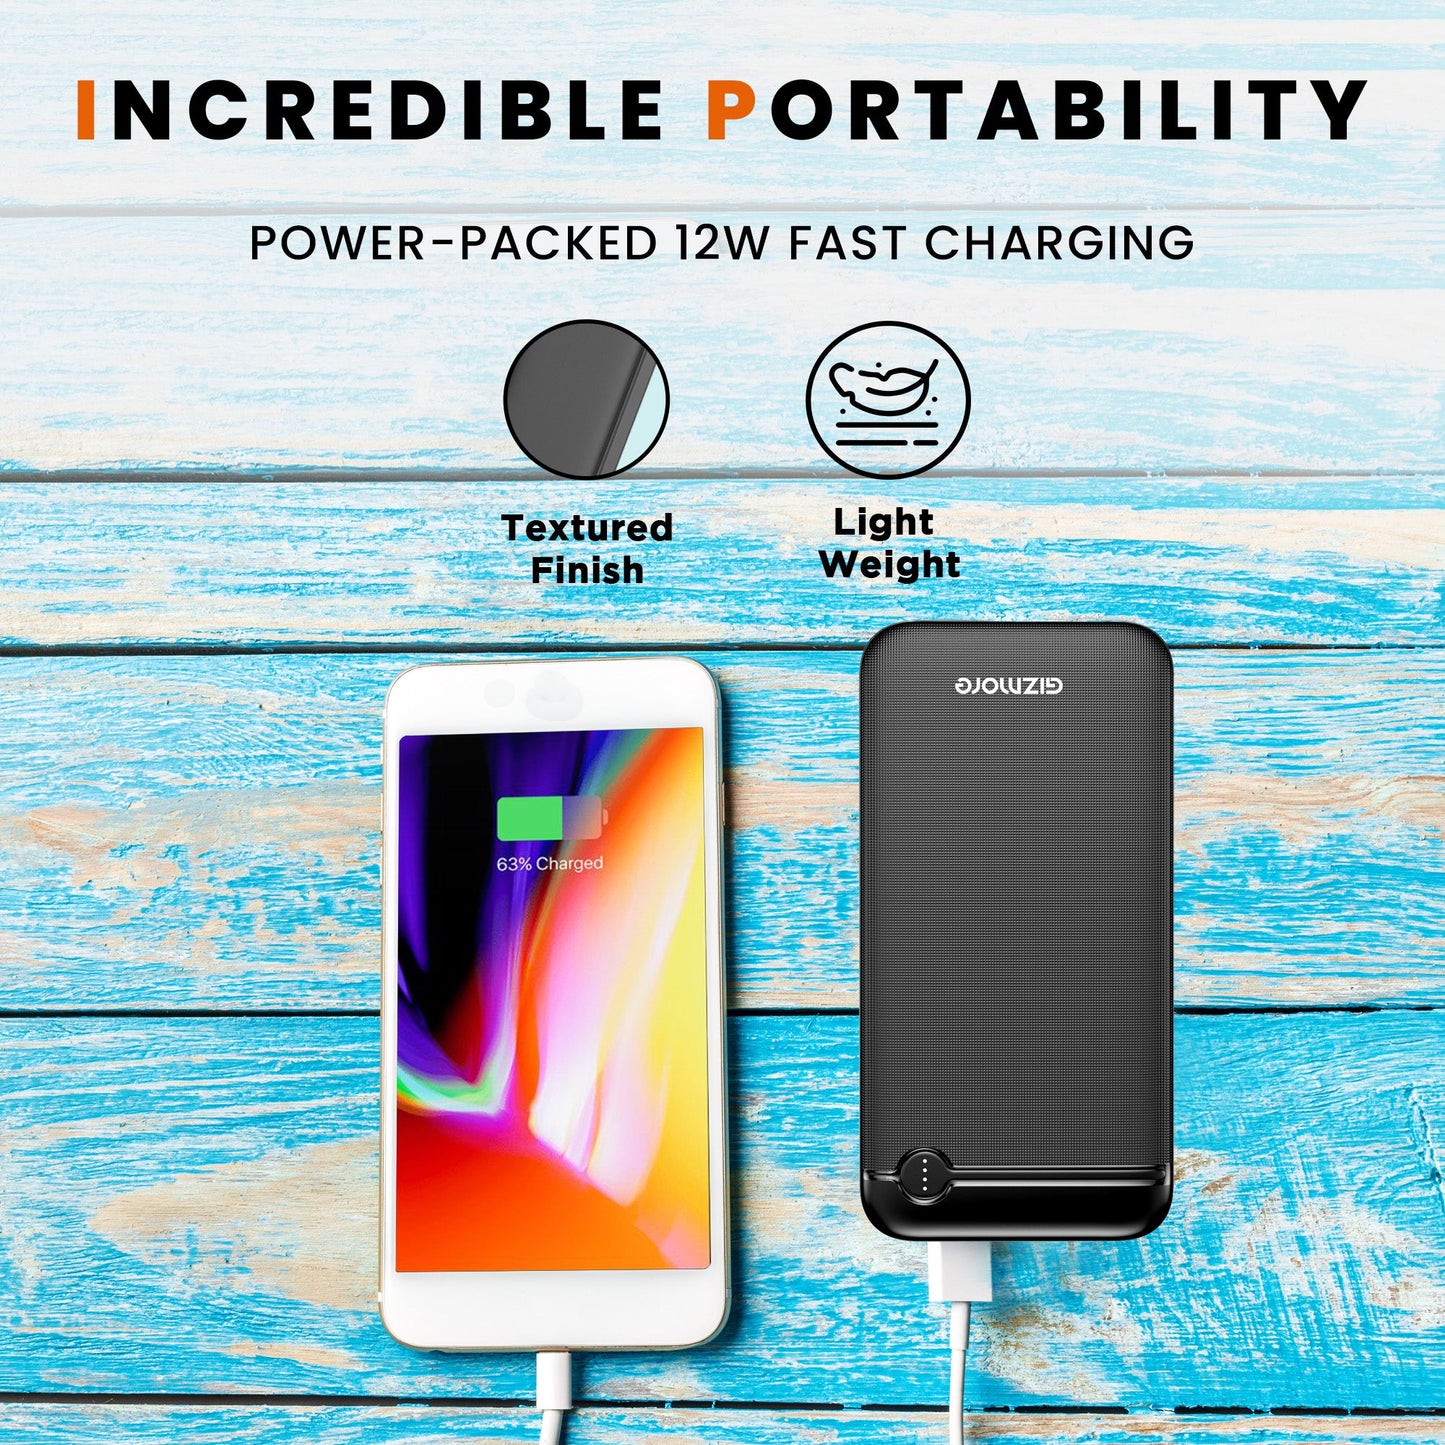 GIZMORE PB20KP4 20000mAh 12W Power Bank With Fast Charging  Dual Output Ports  Dual Input Ports  LED Indicator Lithium Polymer Power Bank for Mobiles Tablets and Digital Camera Black